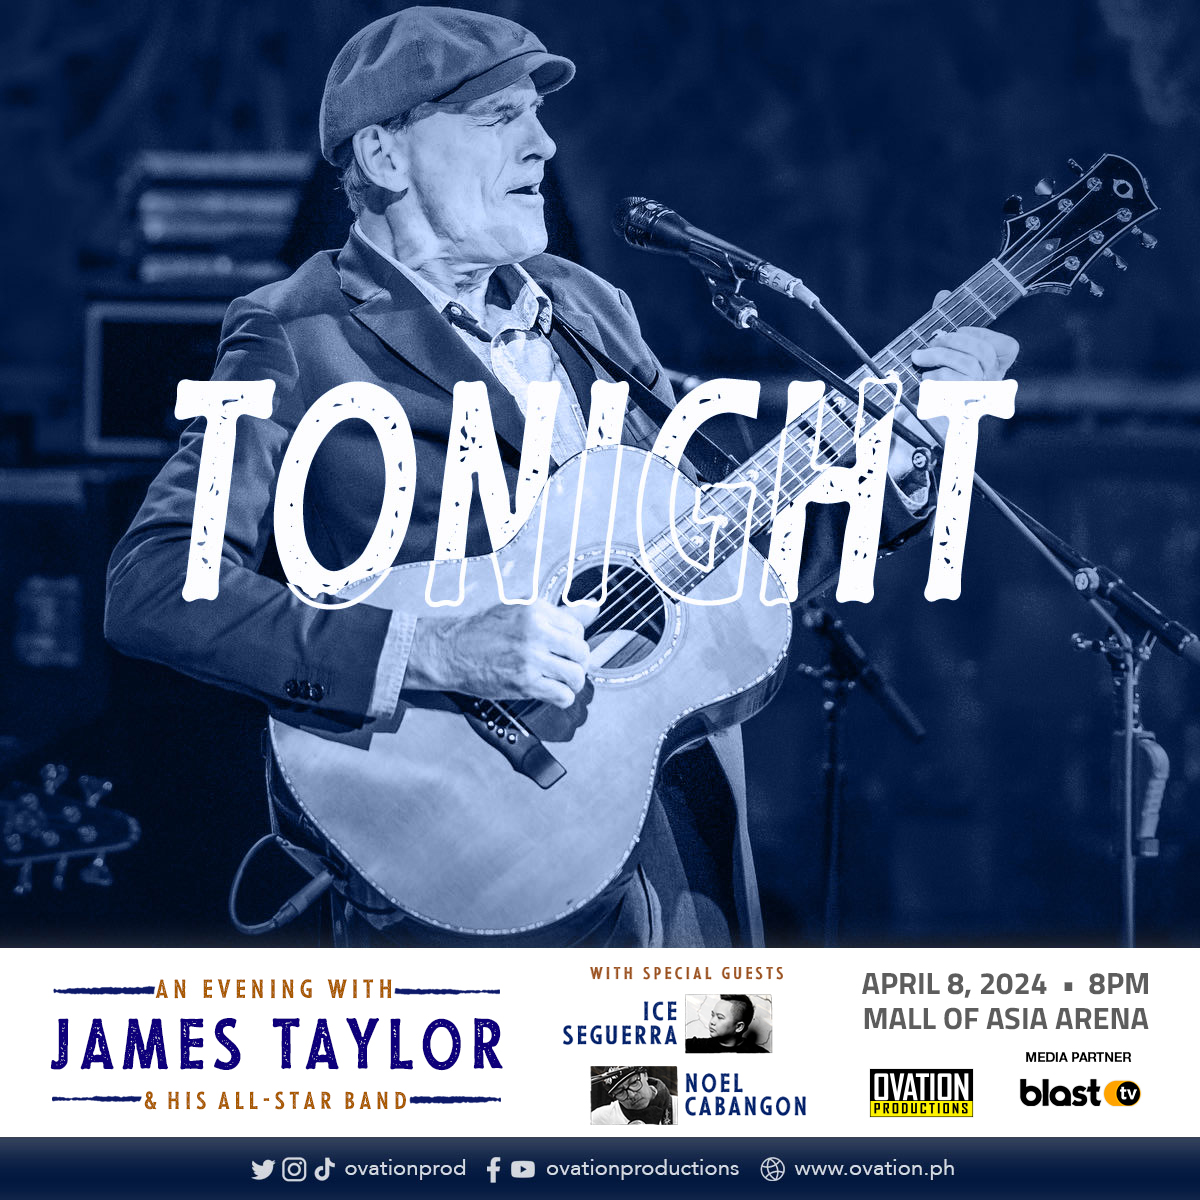 Witness James Taylor and his All-Star Band live at the Mall of Asia Arena tonight! With special guests, Ice Seguerra and Noel Cabangon.